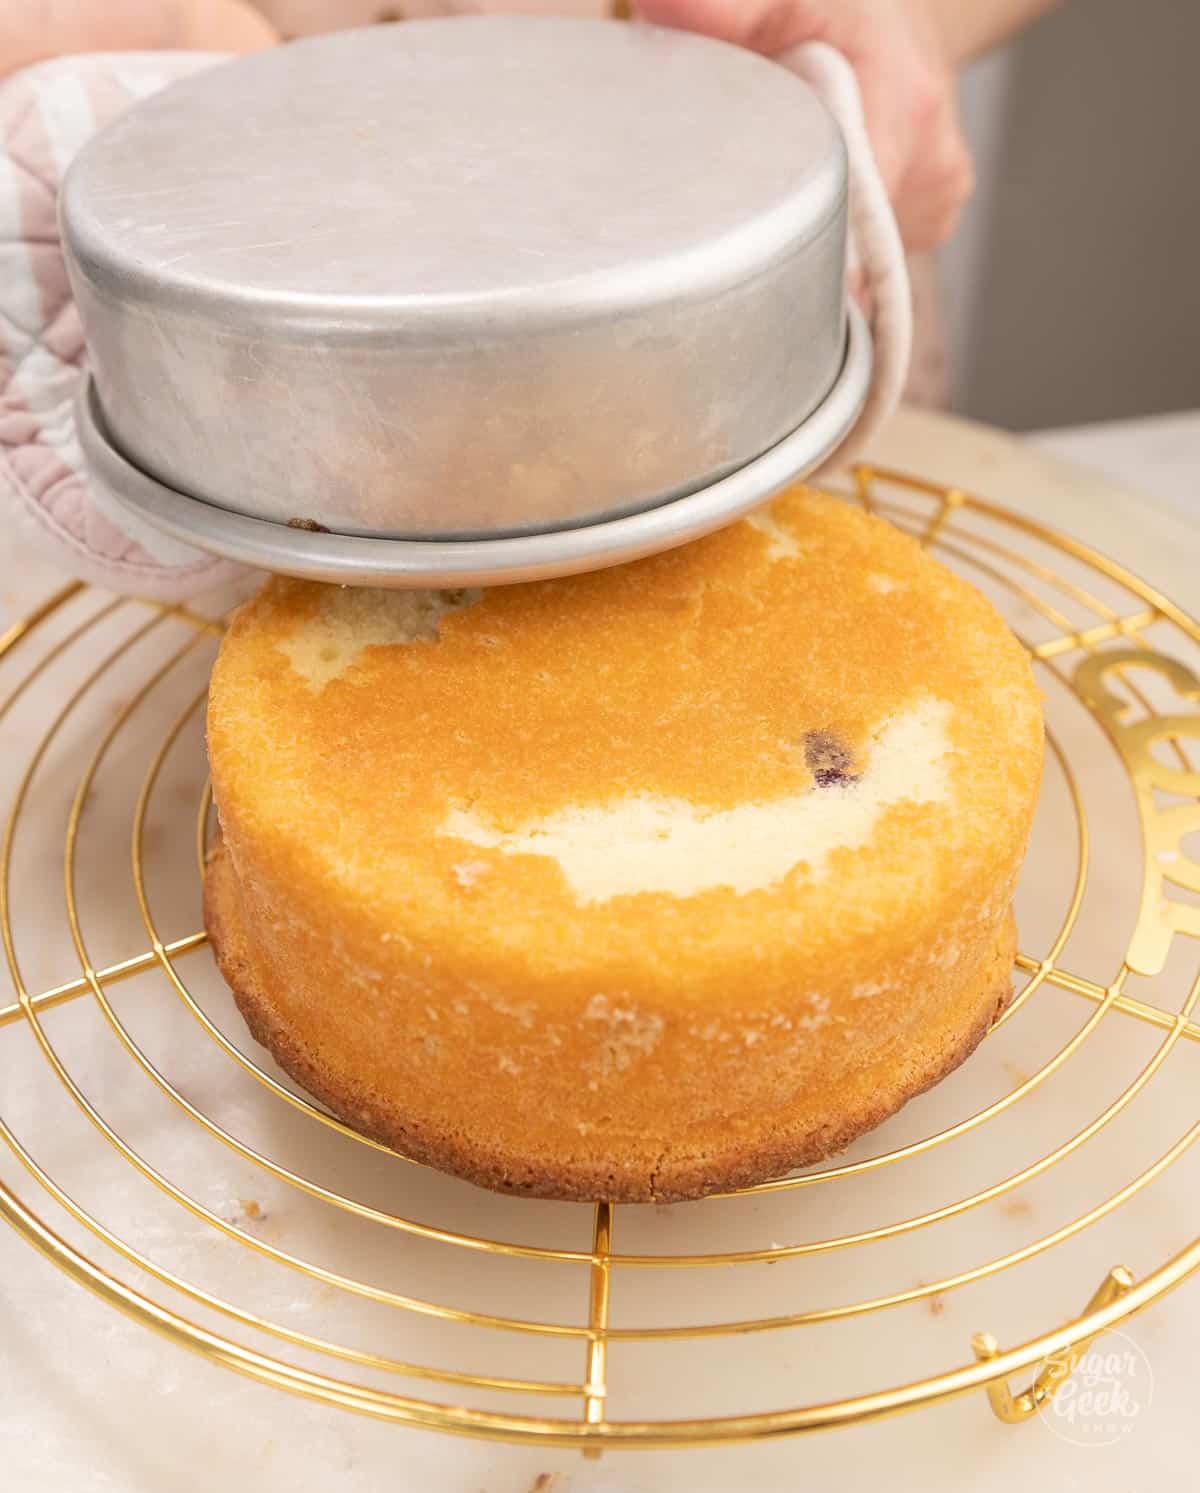 removing the lemon blueberry cake from the cake pan